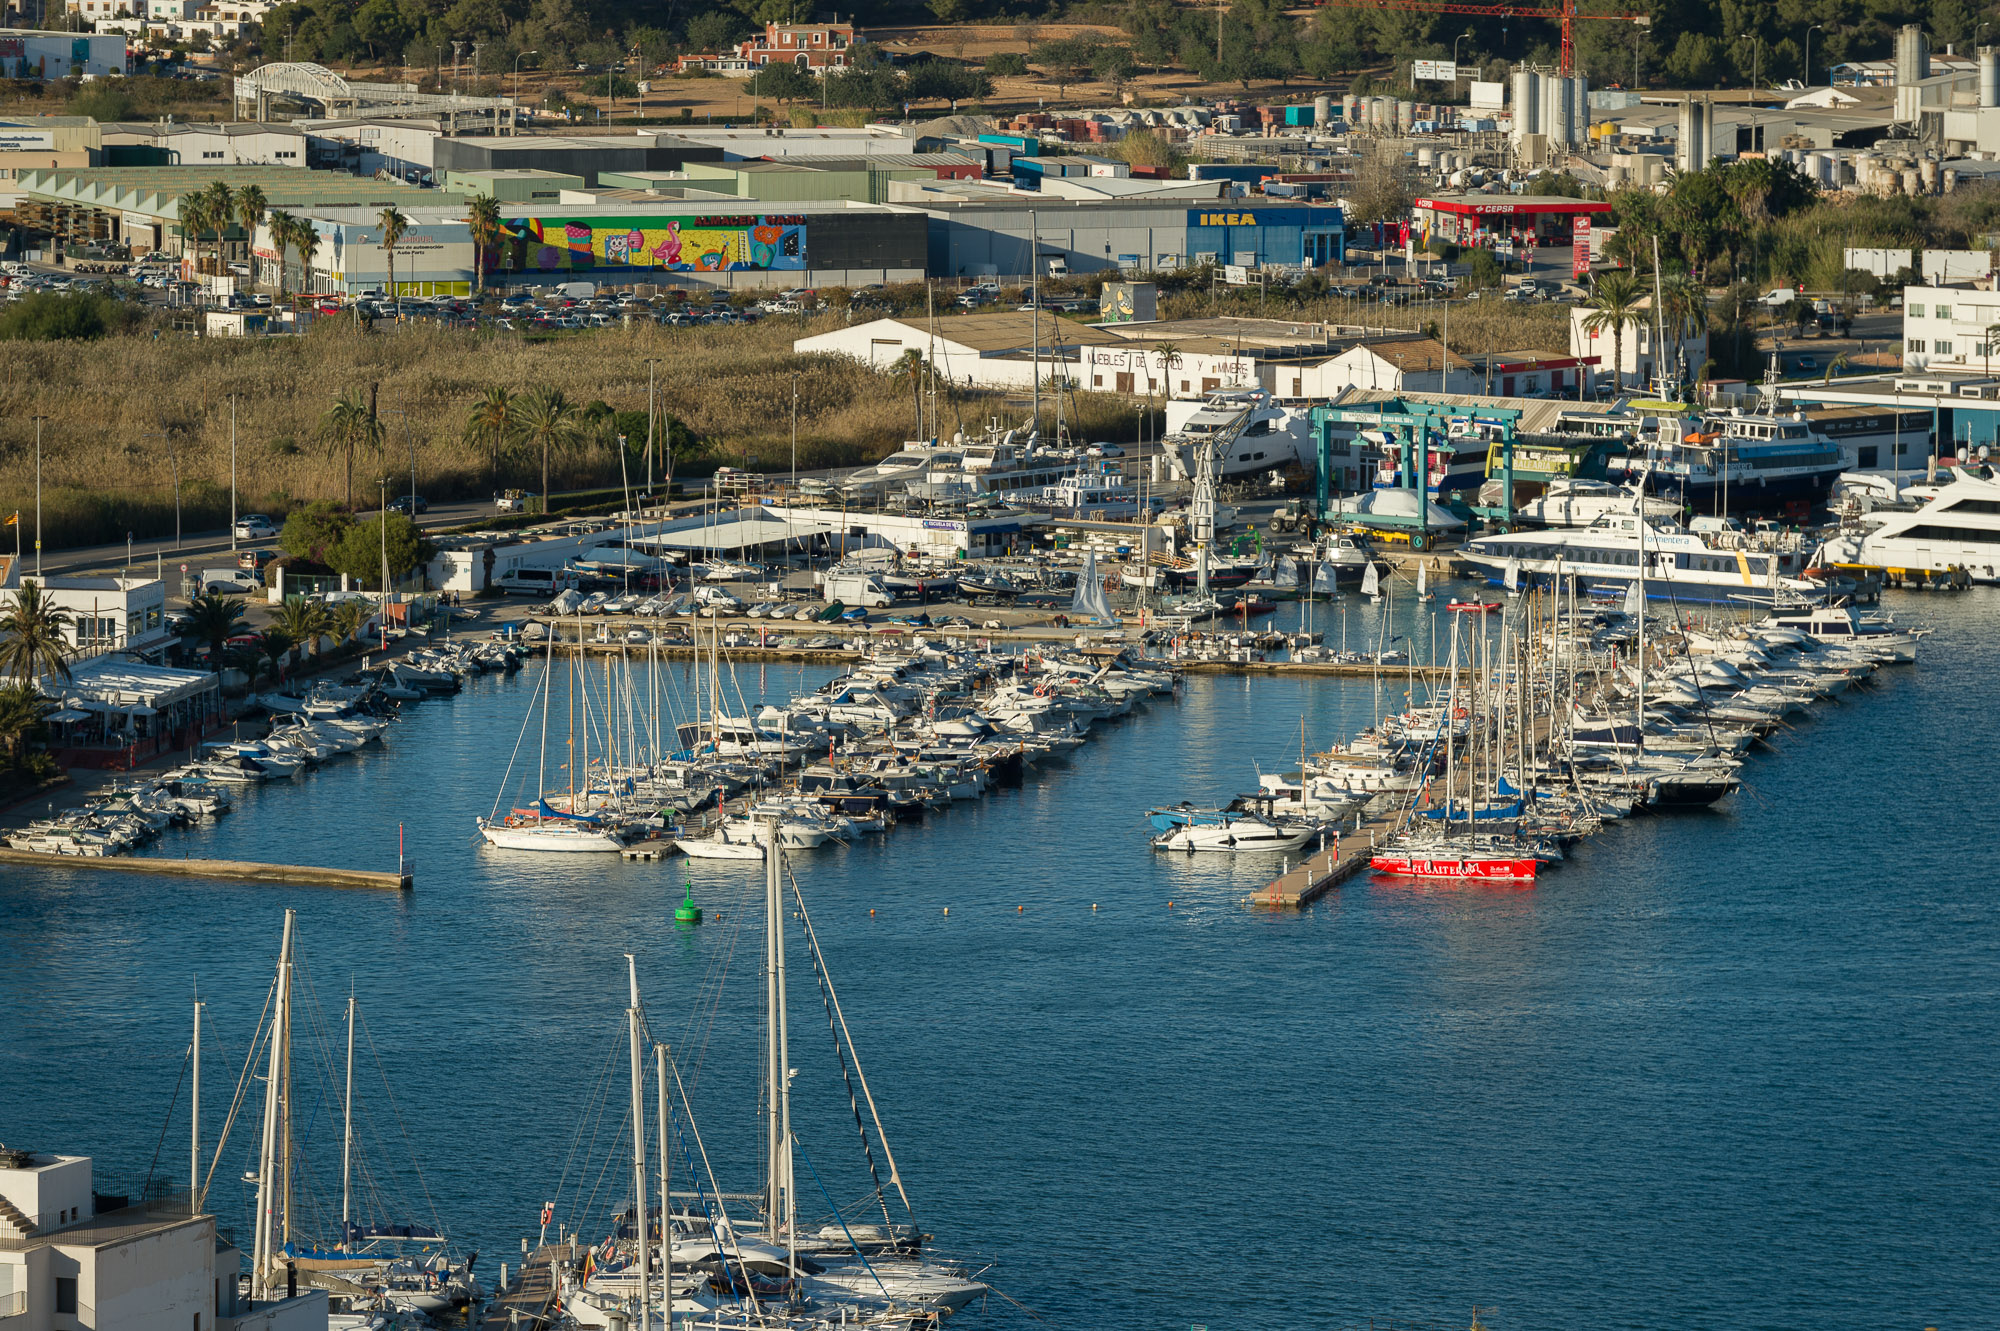 The APB grants authorisation for the management of a nautical facility for small and medium-sized boats in the port of Eivissa to Puertos y Litorales Sostenibles